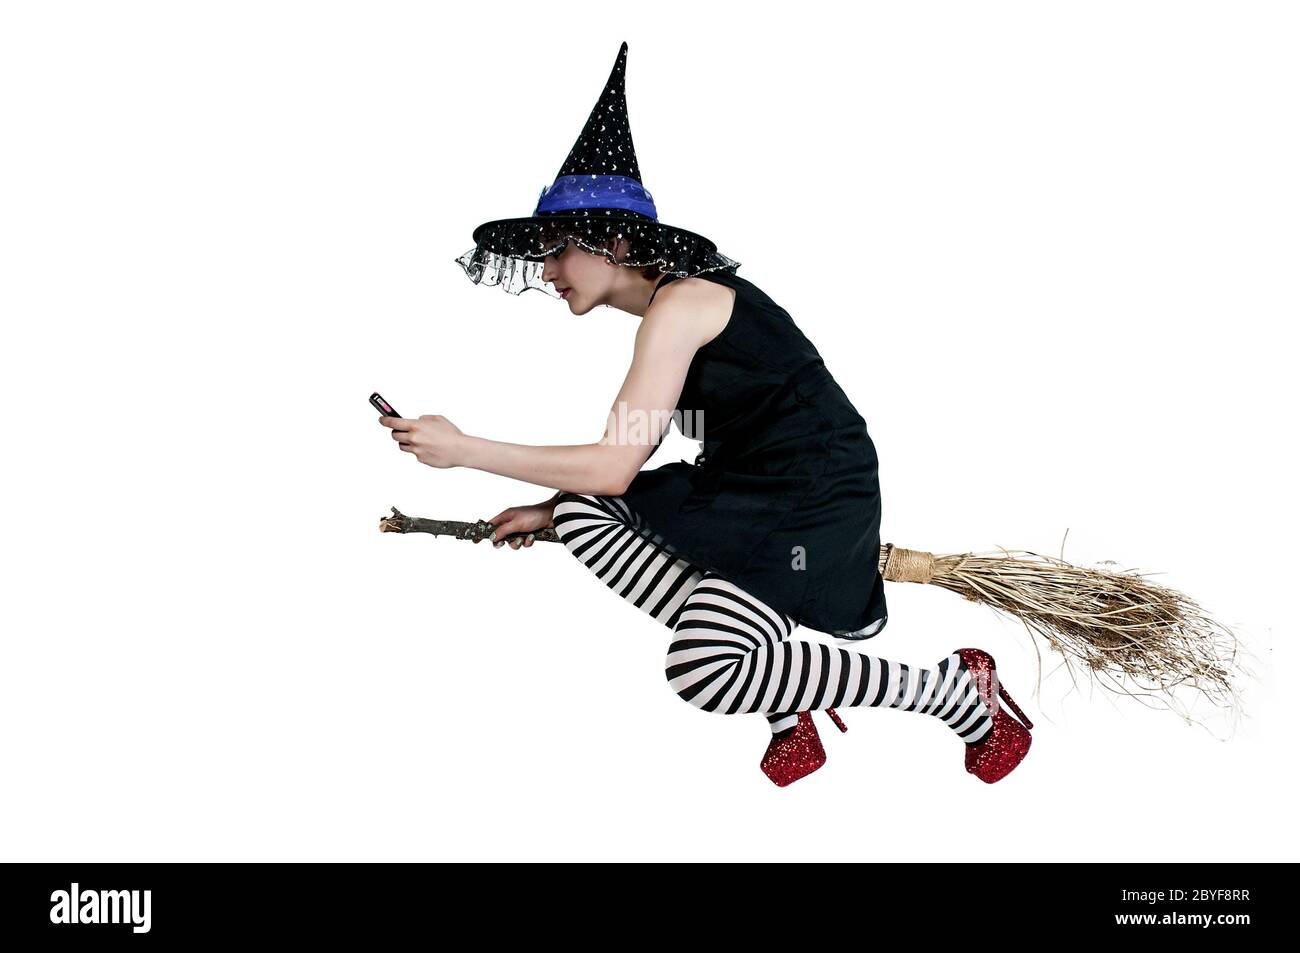 Wicked Witch Stock Photo